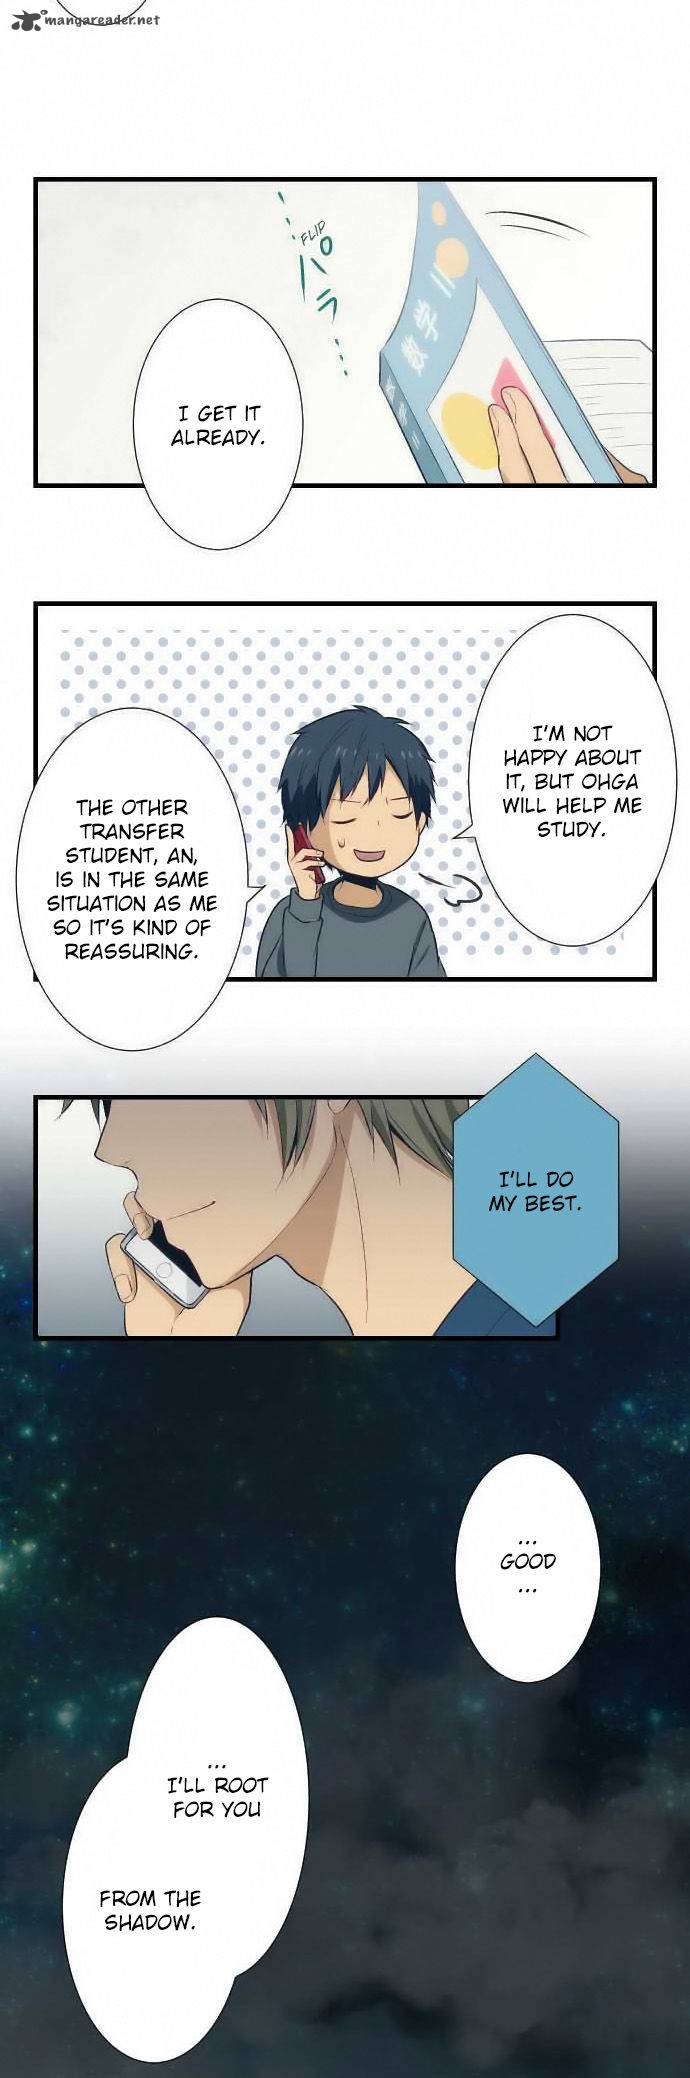 Relife 25 14